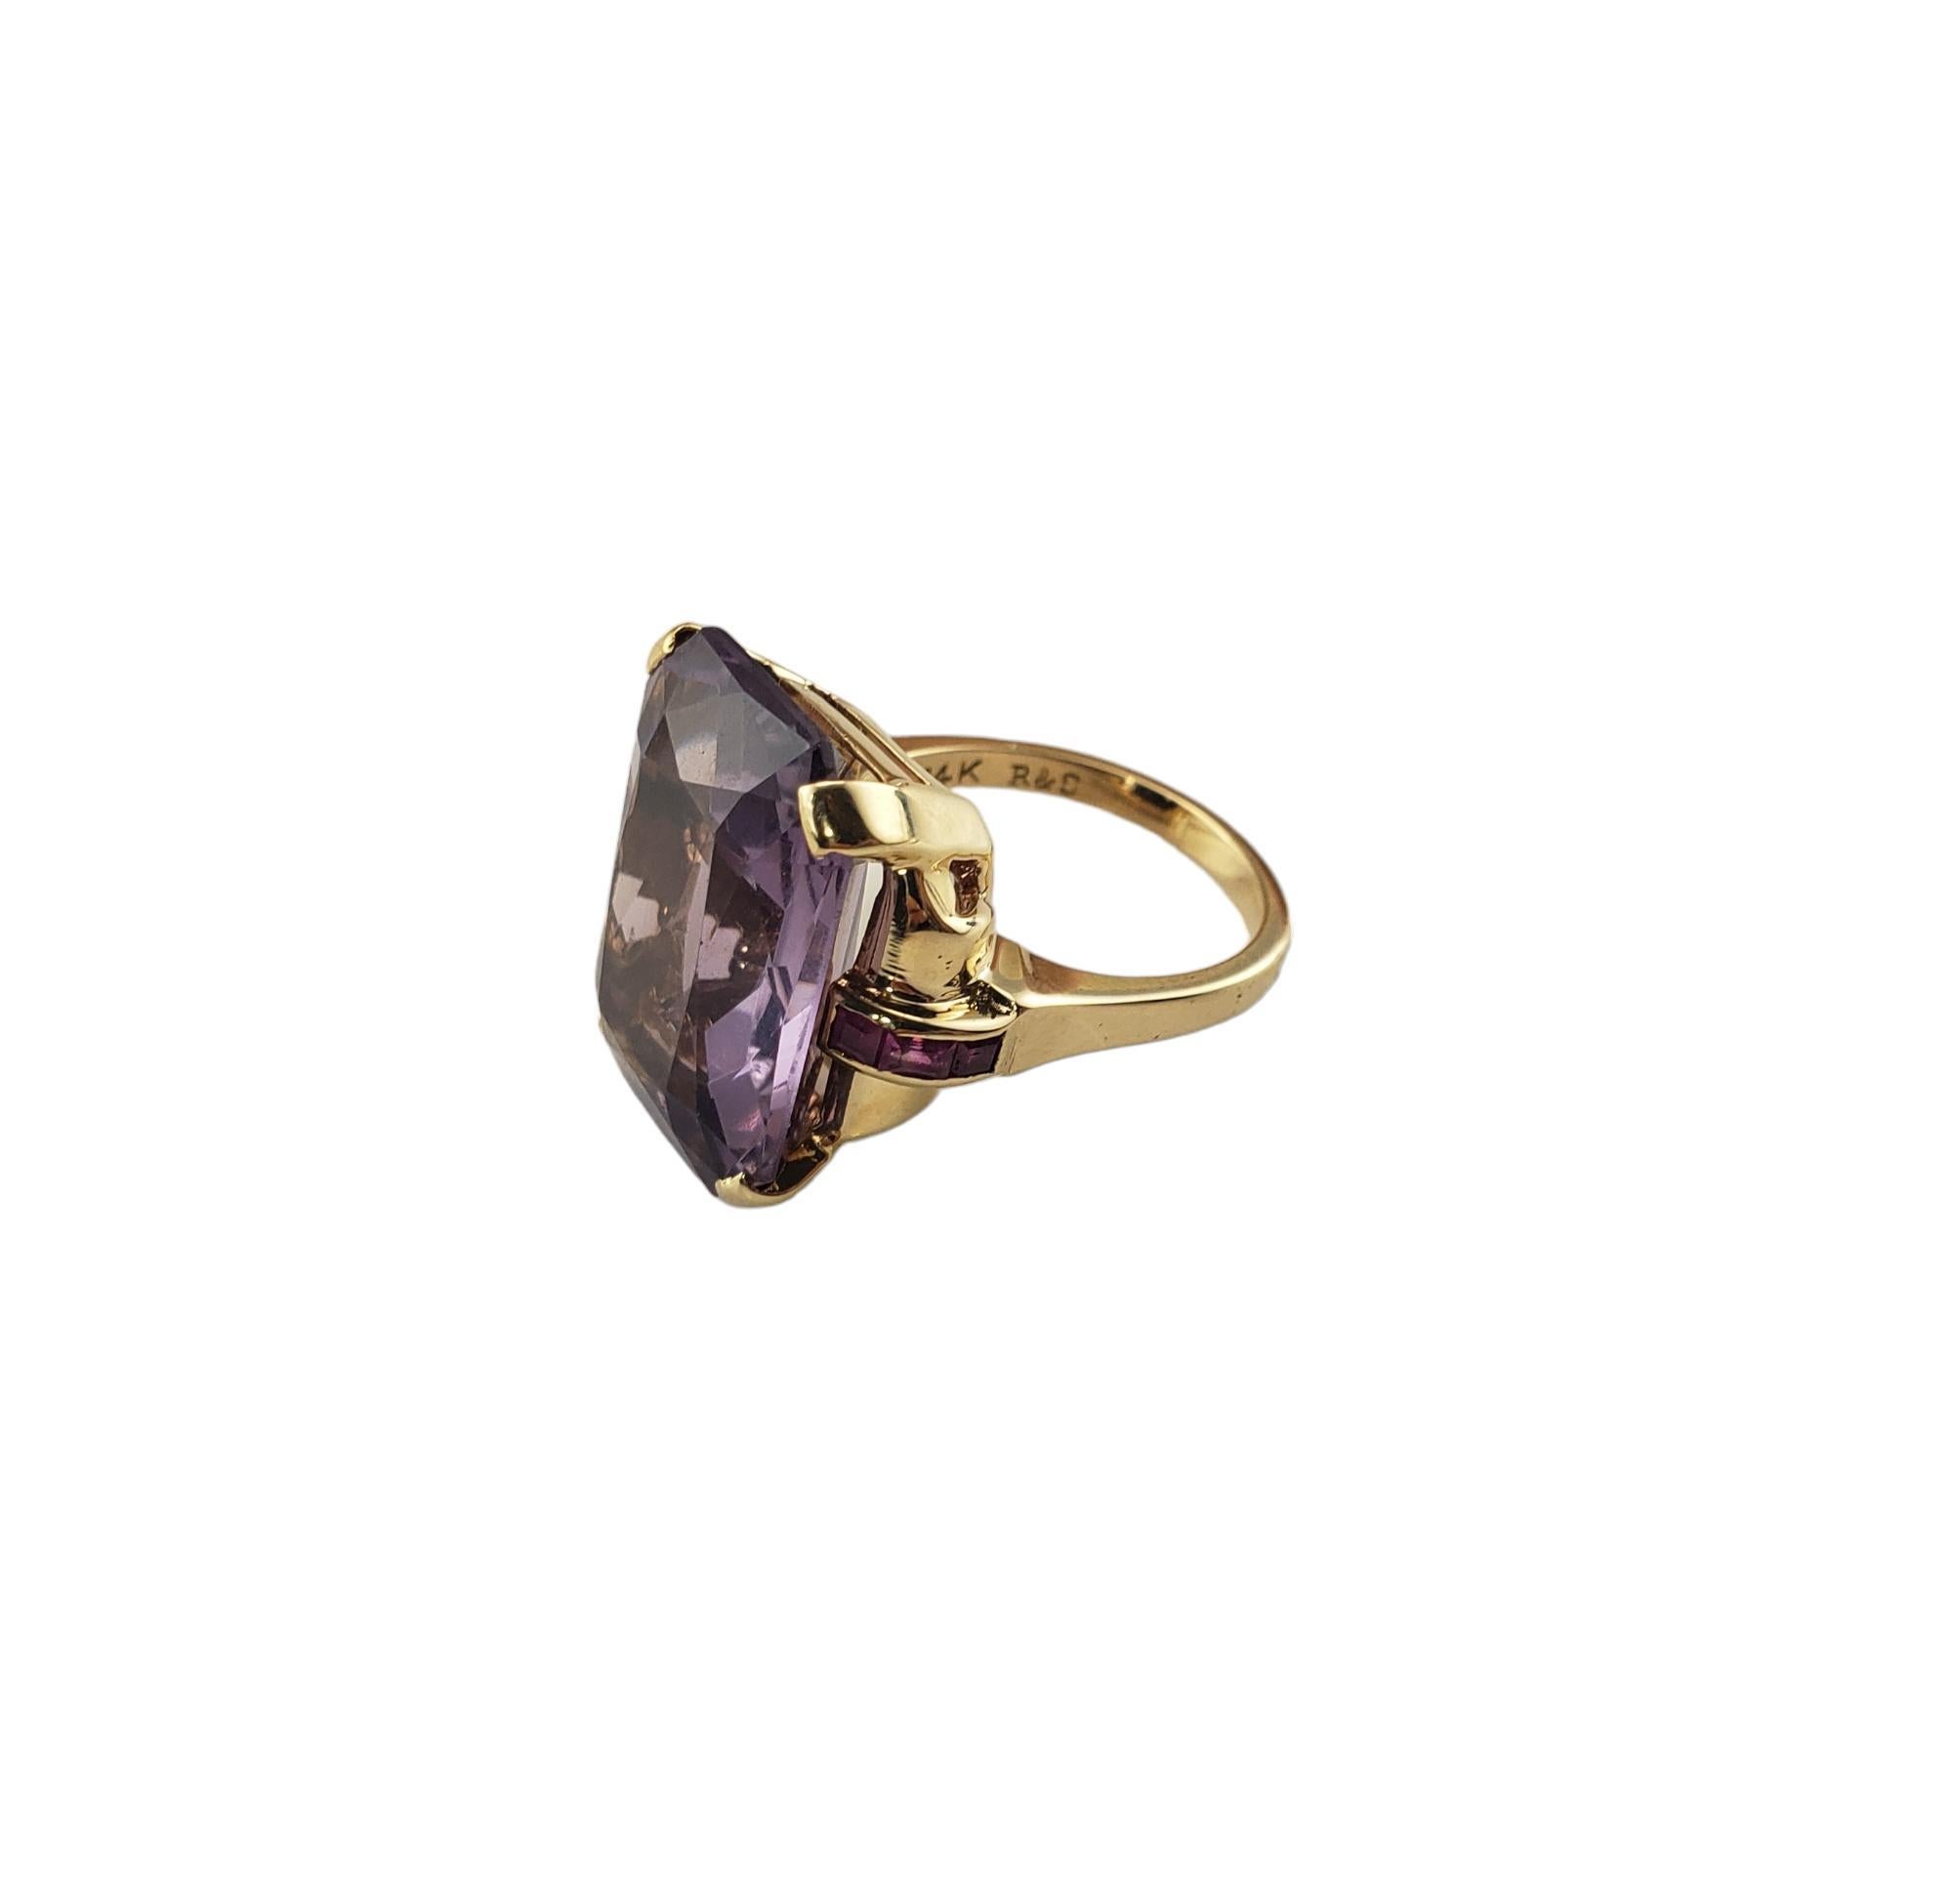  14K Yellow Gold Amethyst and Garnet Ring Size 6.75 #15463 In Good Condition For Sale In Washington Depot, CT